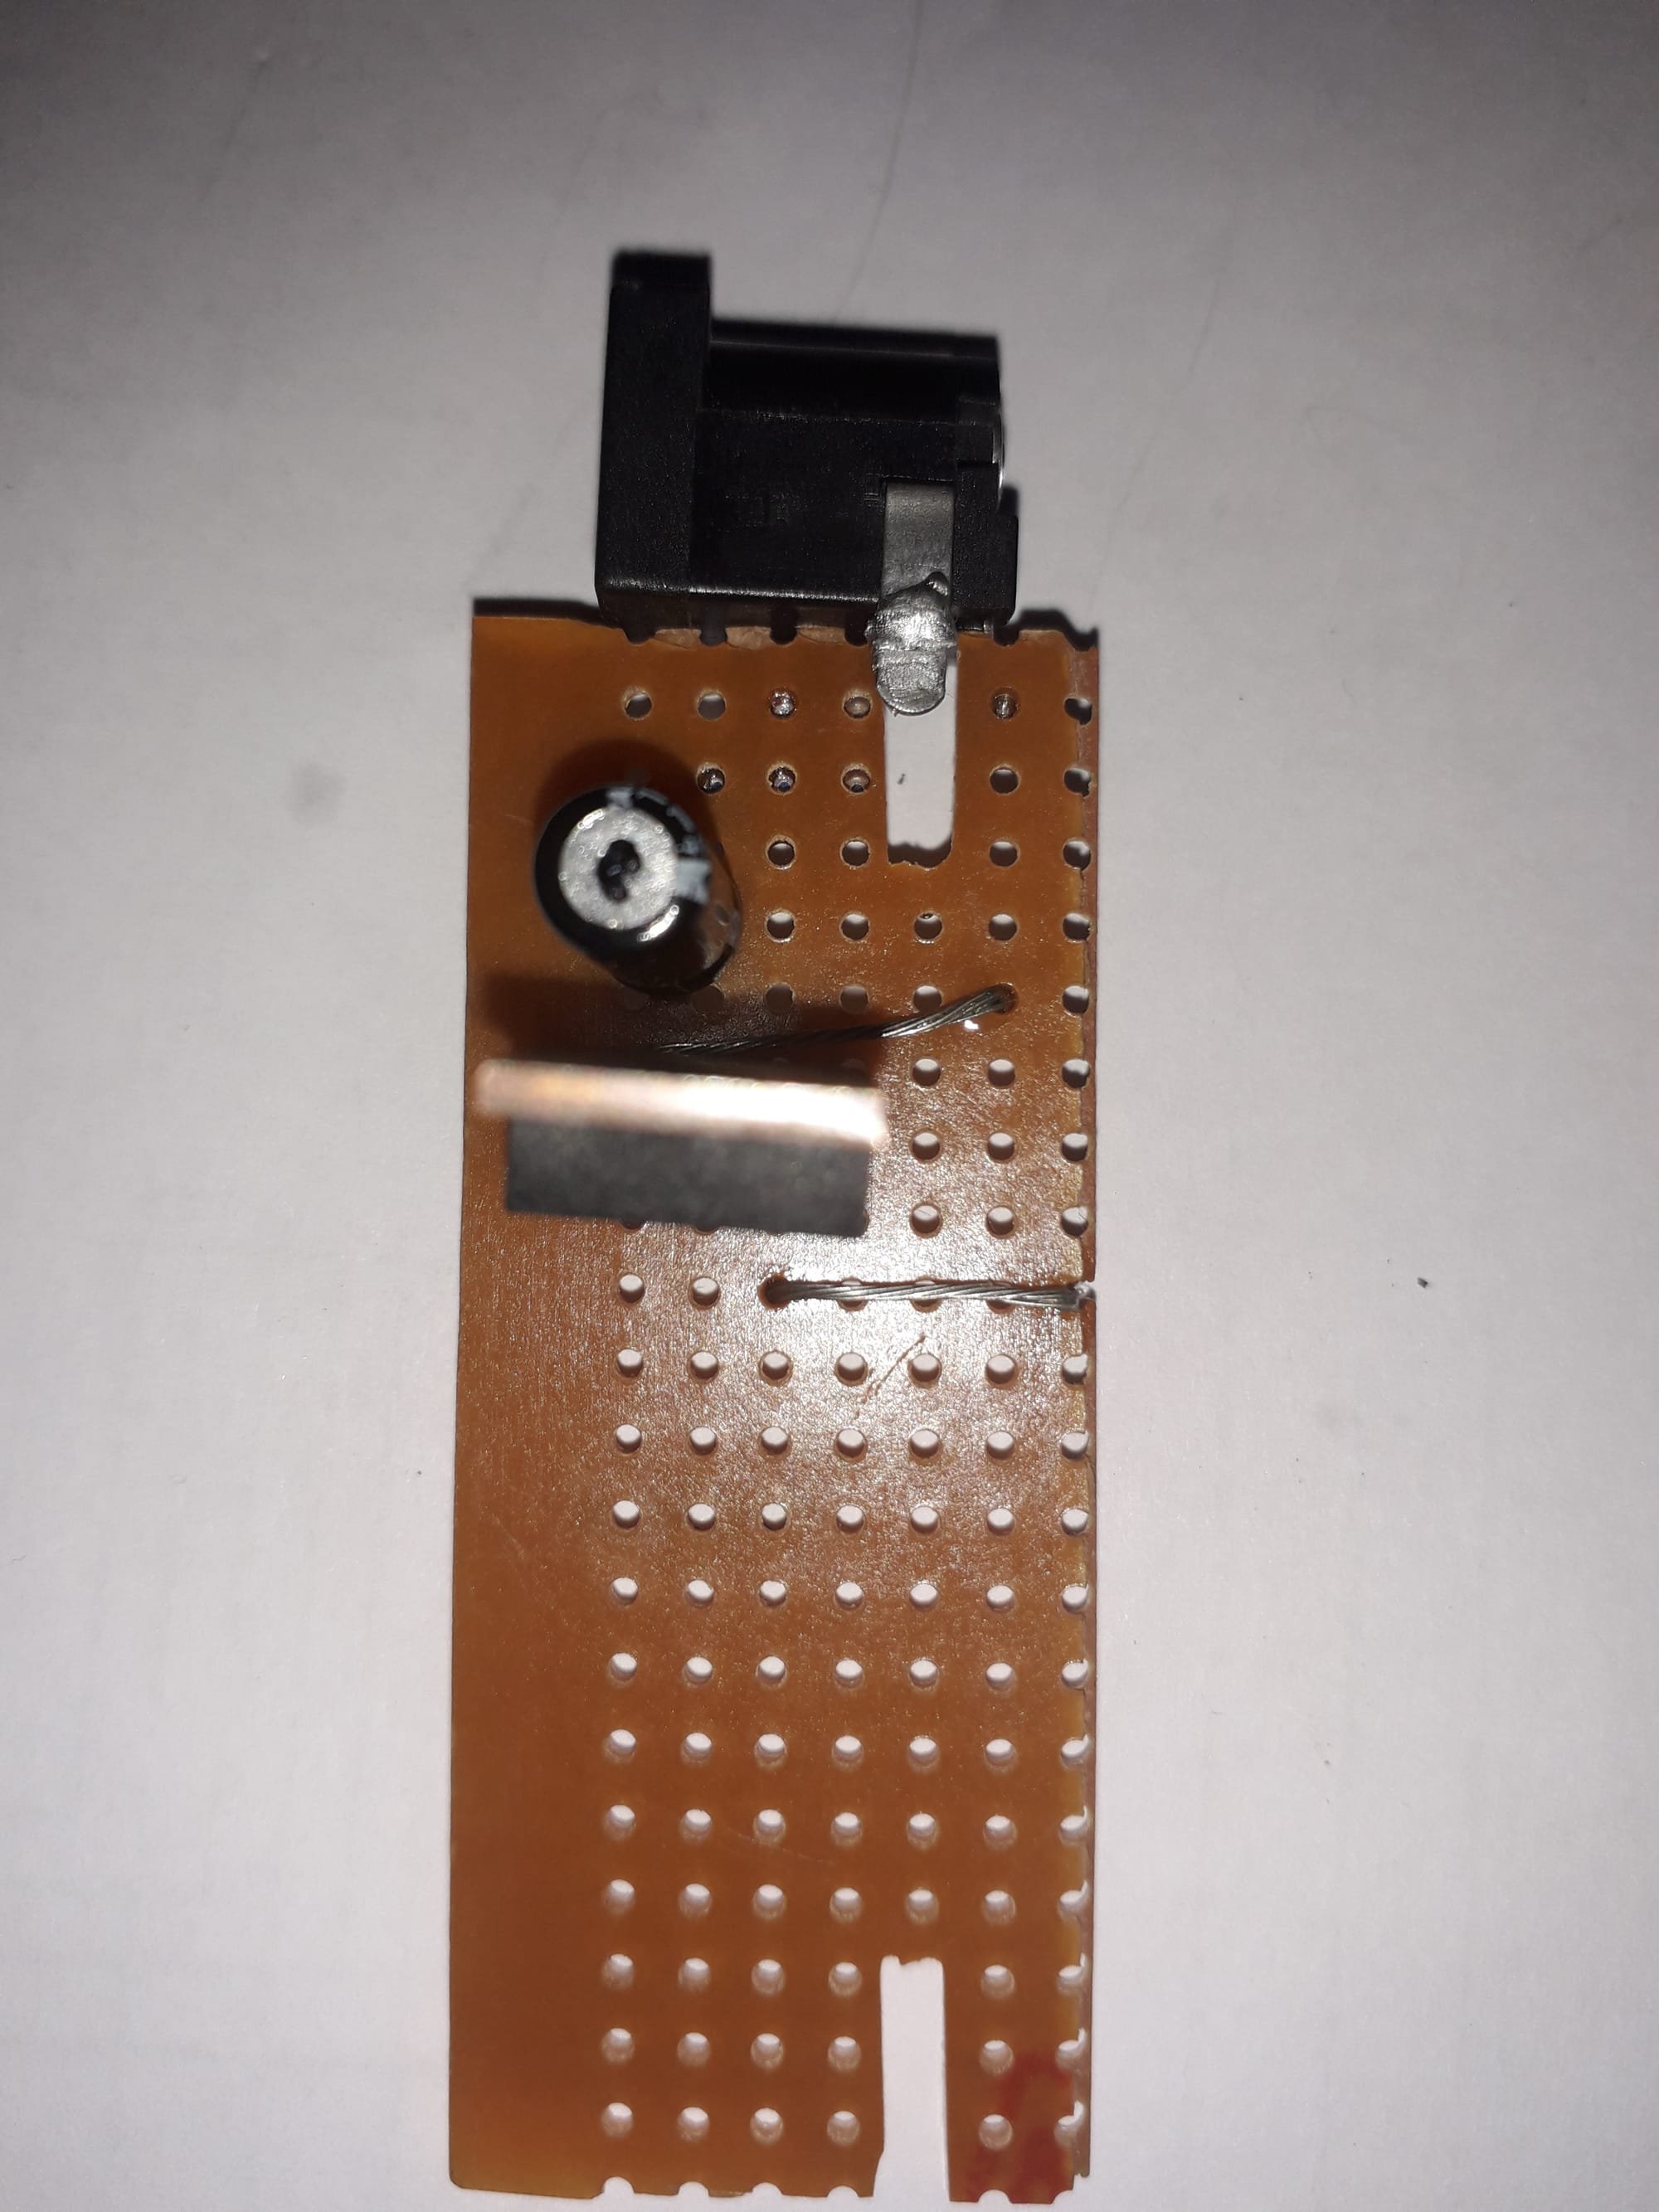 ZX81 peripheral supply PCB